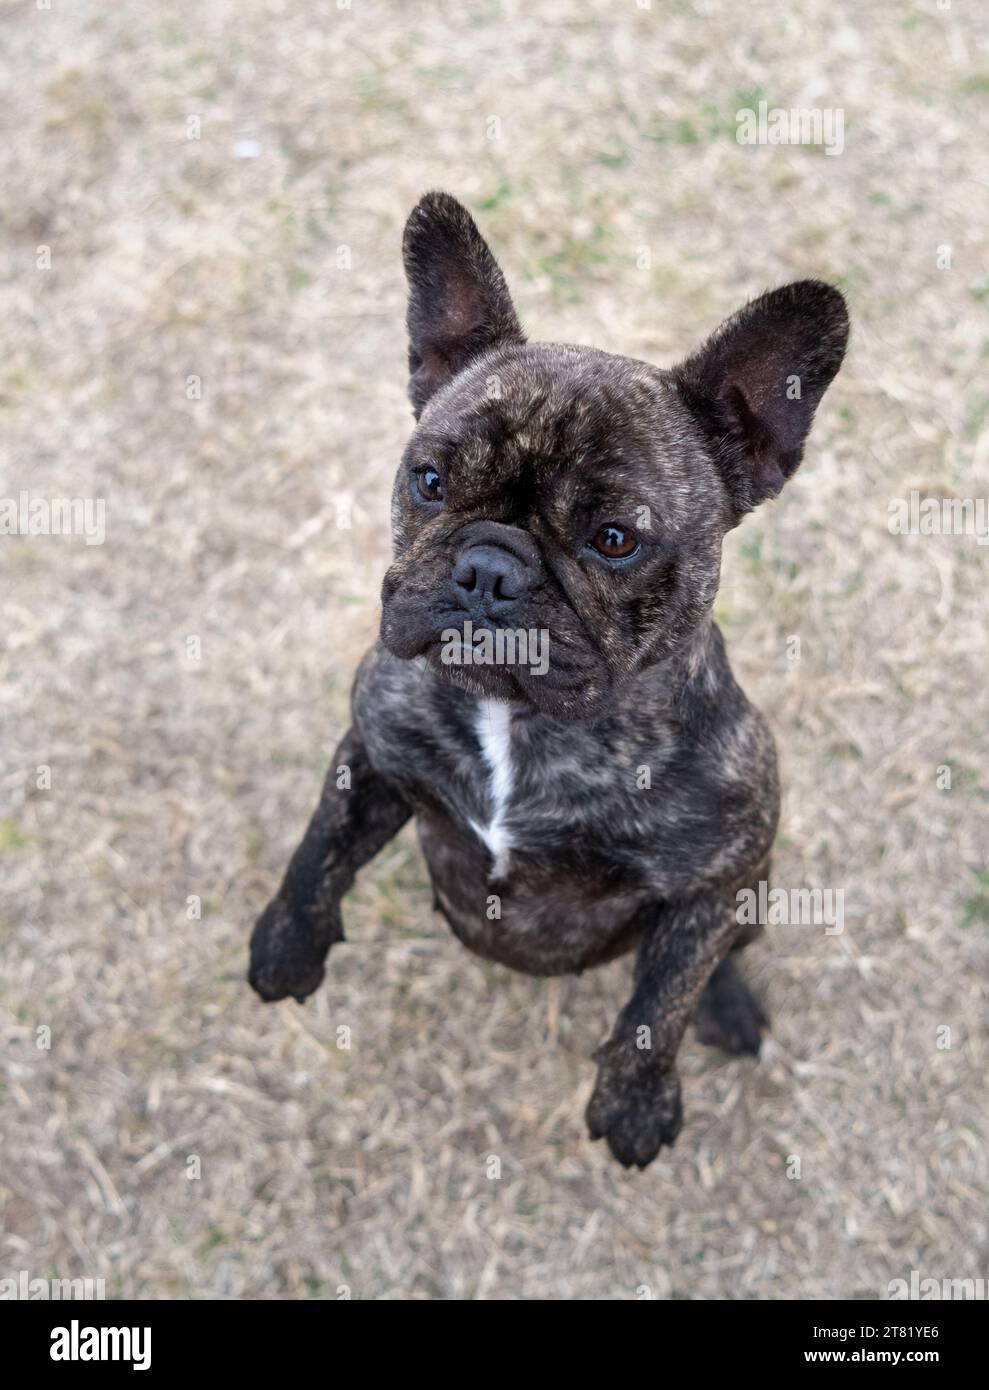 French bulldog in the grass standing on her hind legs Stock Photo